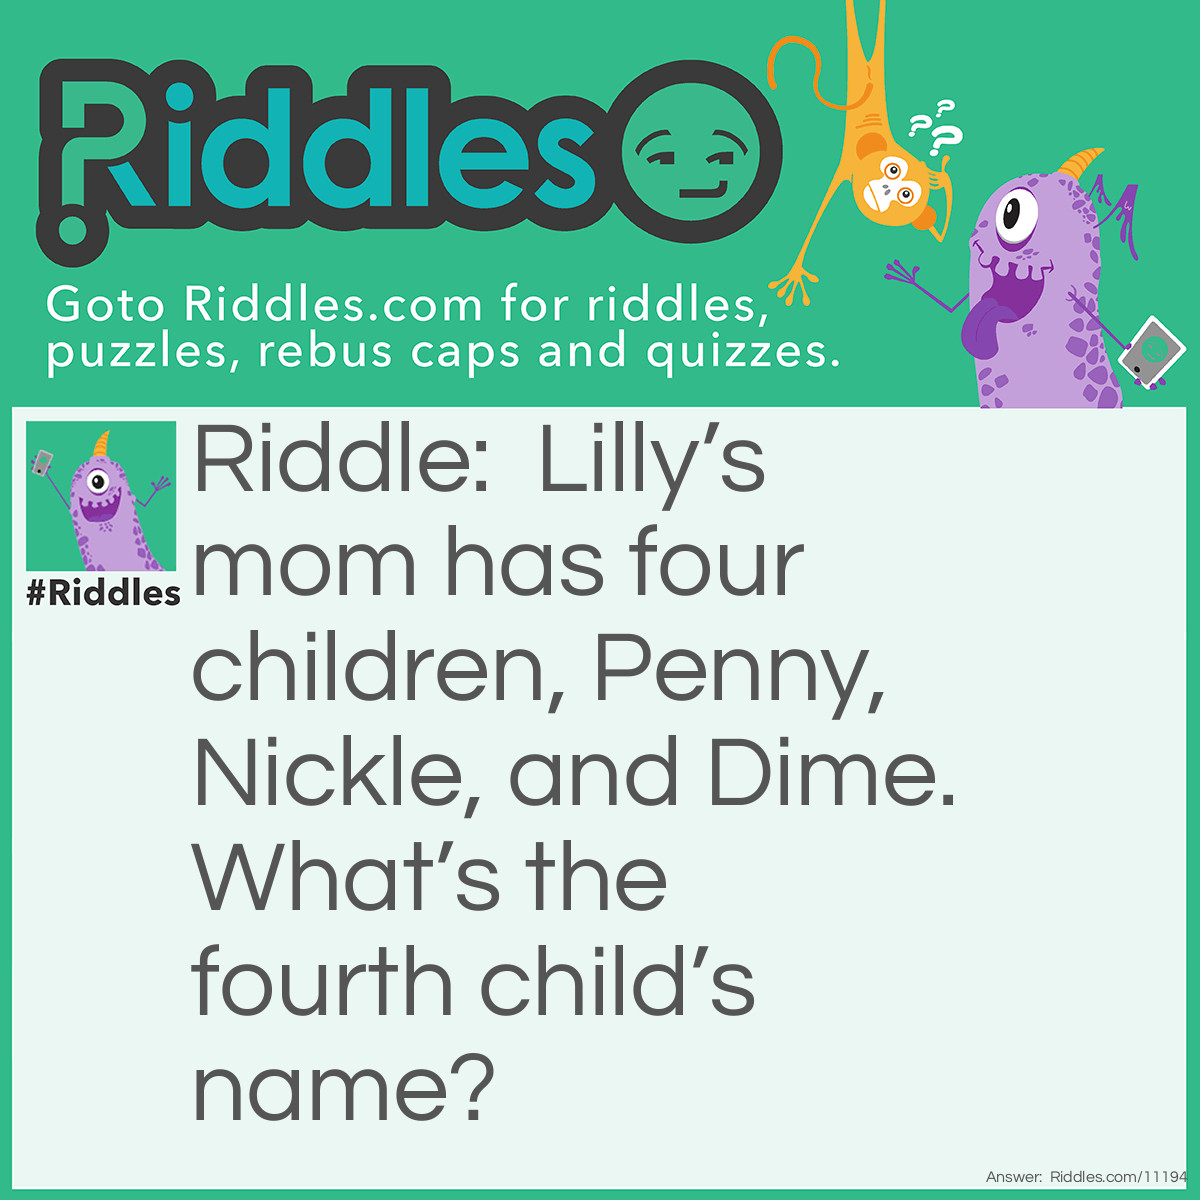 Riddle: Lilly’s mom has four children, Penny, Nickle, and Dime. What’s the fourth child’s name? Answer: Lilly.